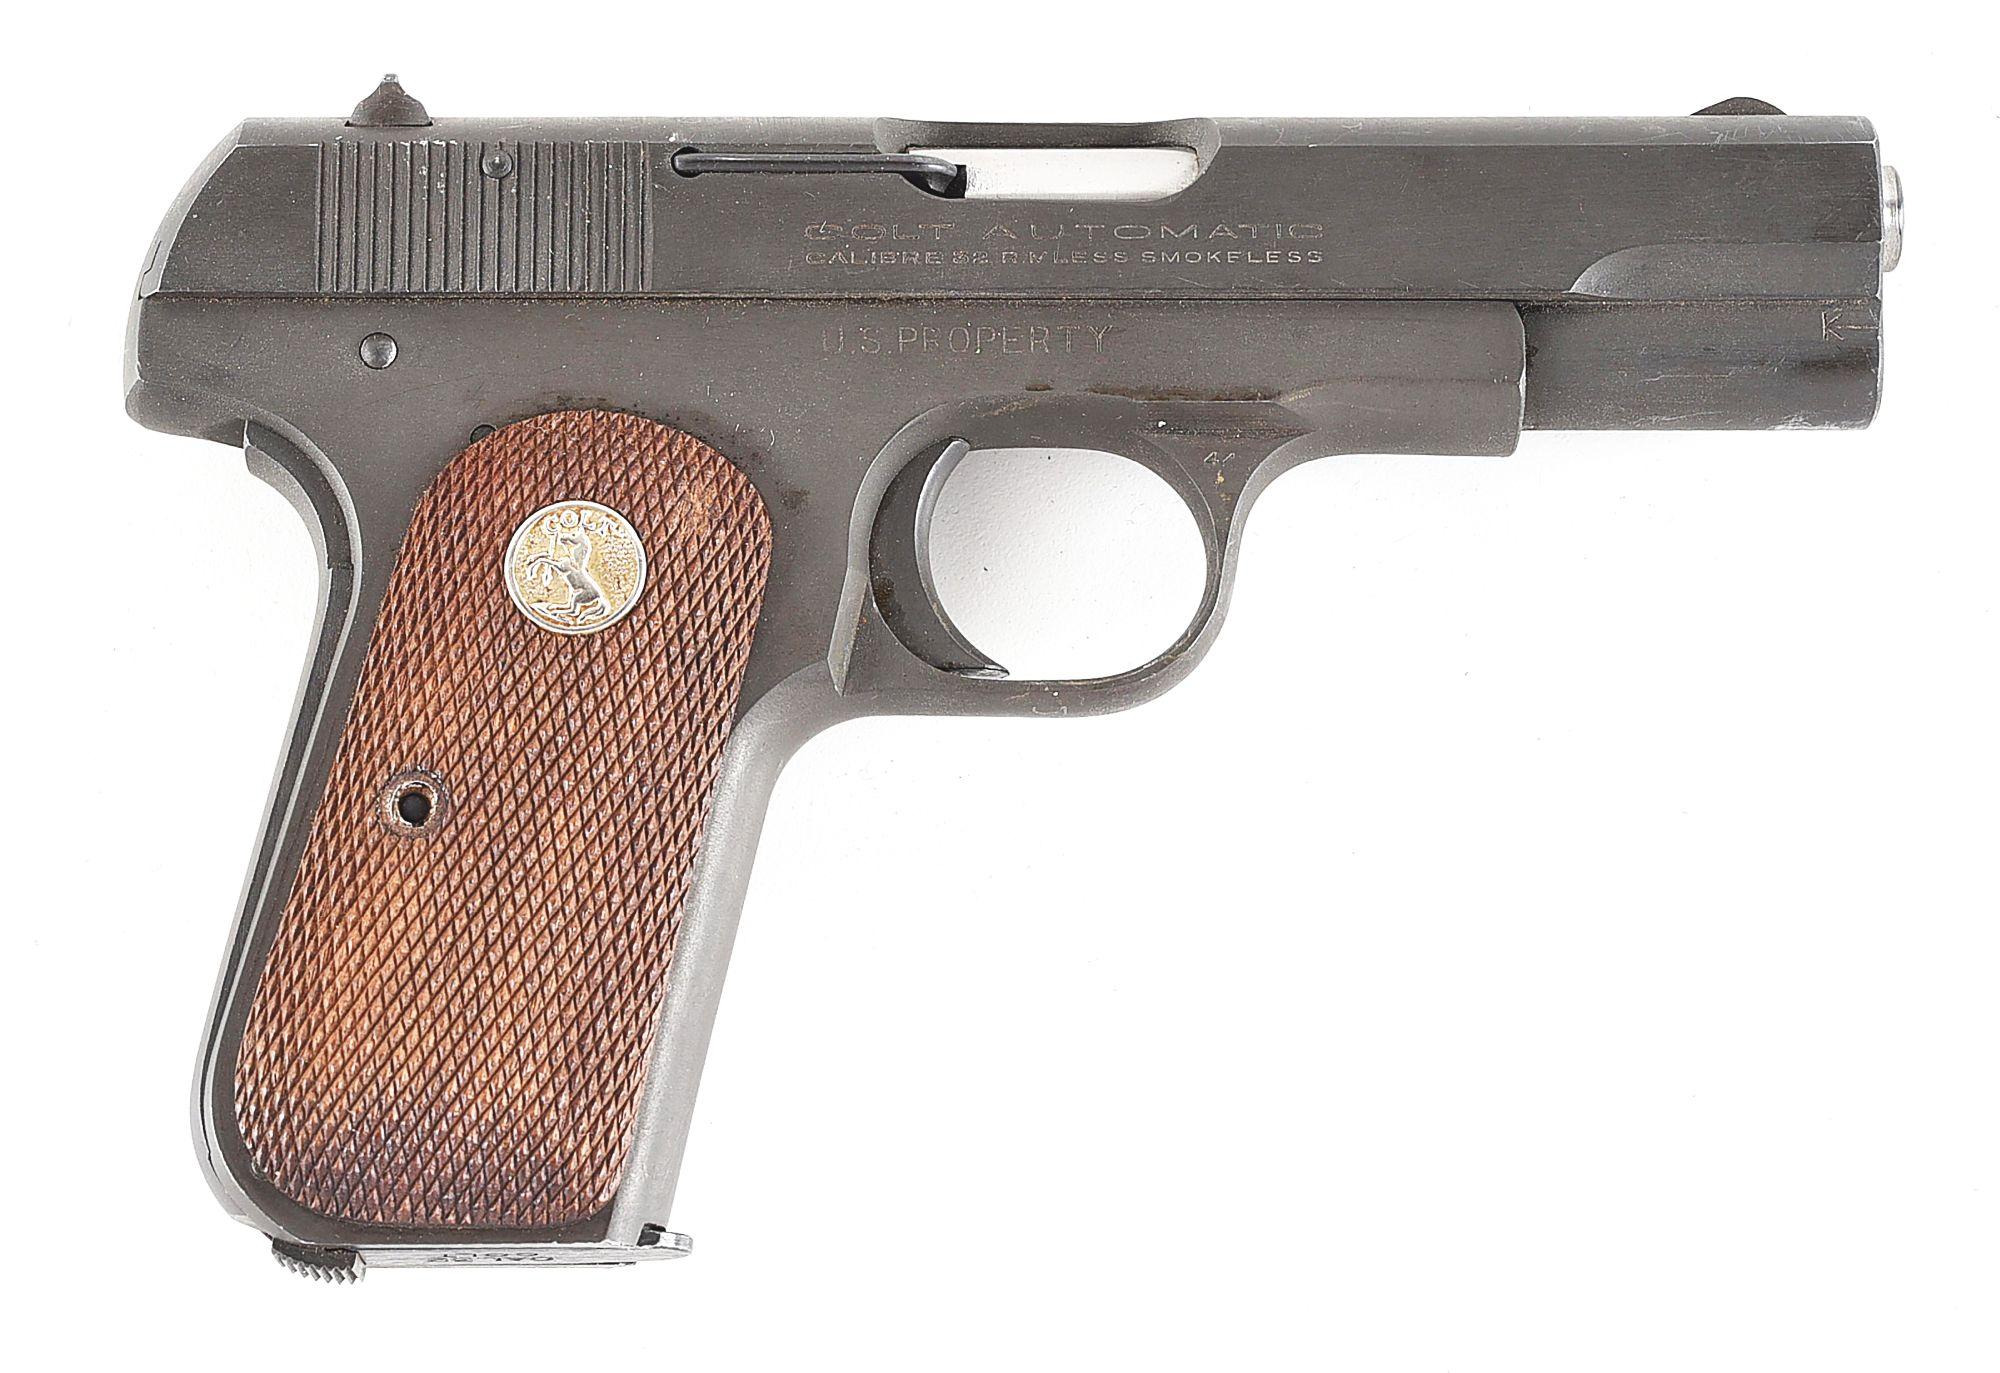 (C) DOCUMENTED COLT MODEL 1903 GENERAL OFFICERS PISTOL ISSUED TO BRIGADIER GENERAL RUSSELL T. FLINN.